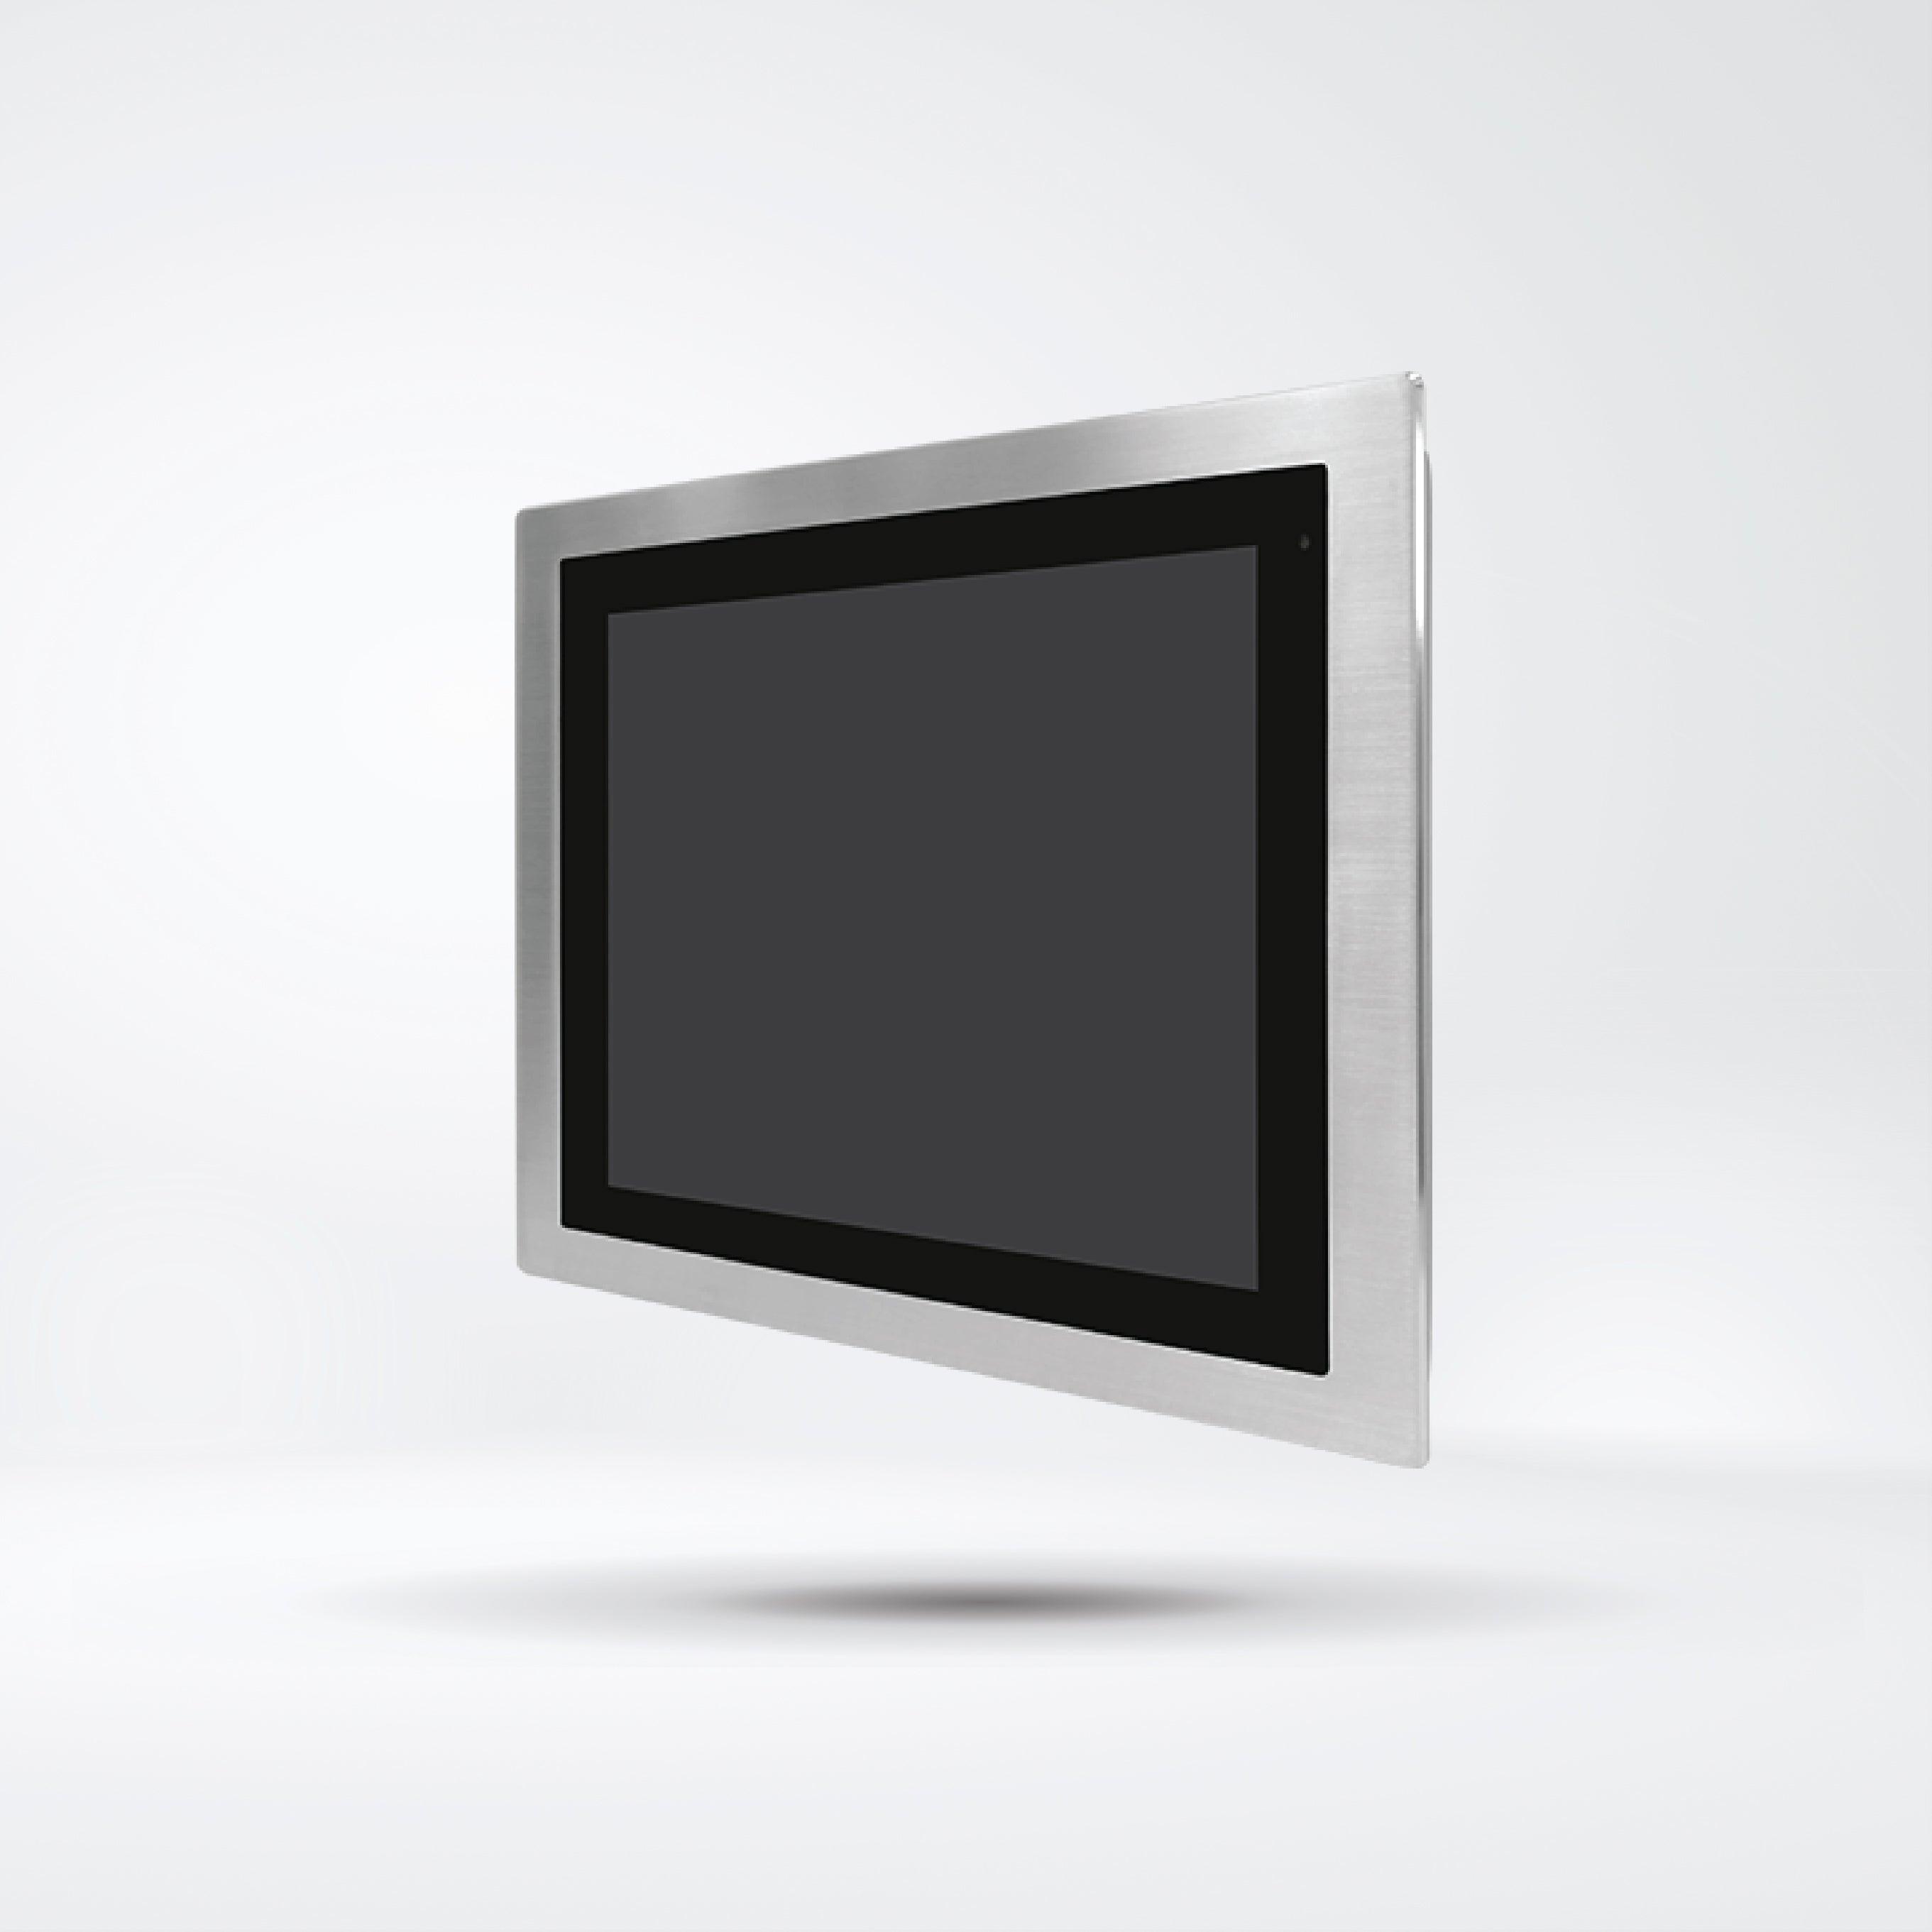 FABS-115P 15” Flat Front Panel IP66 Stainless Chassis Display - Riverplus